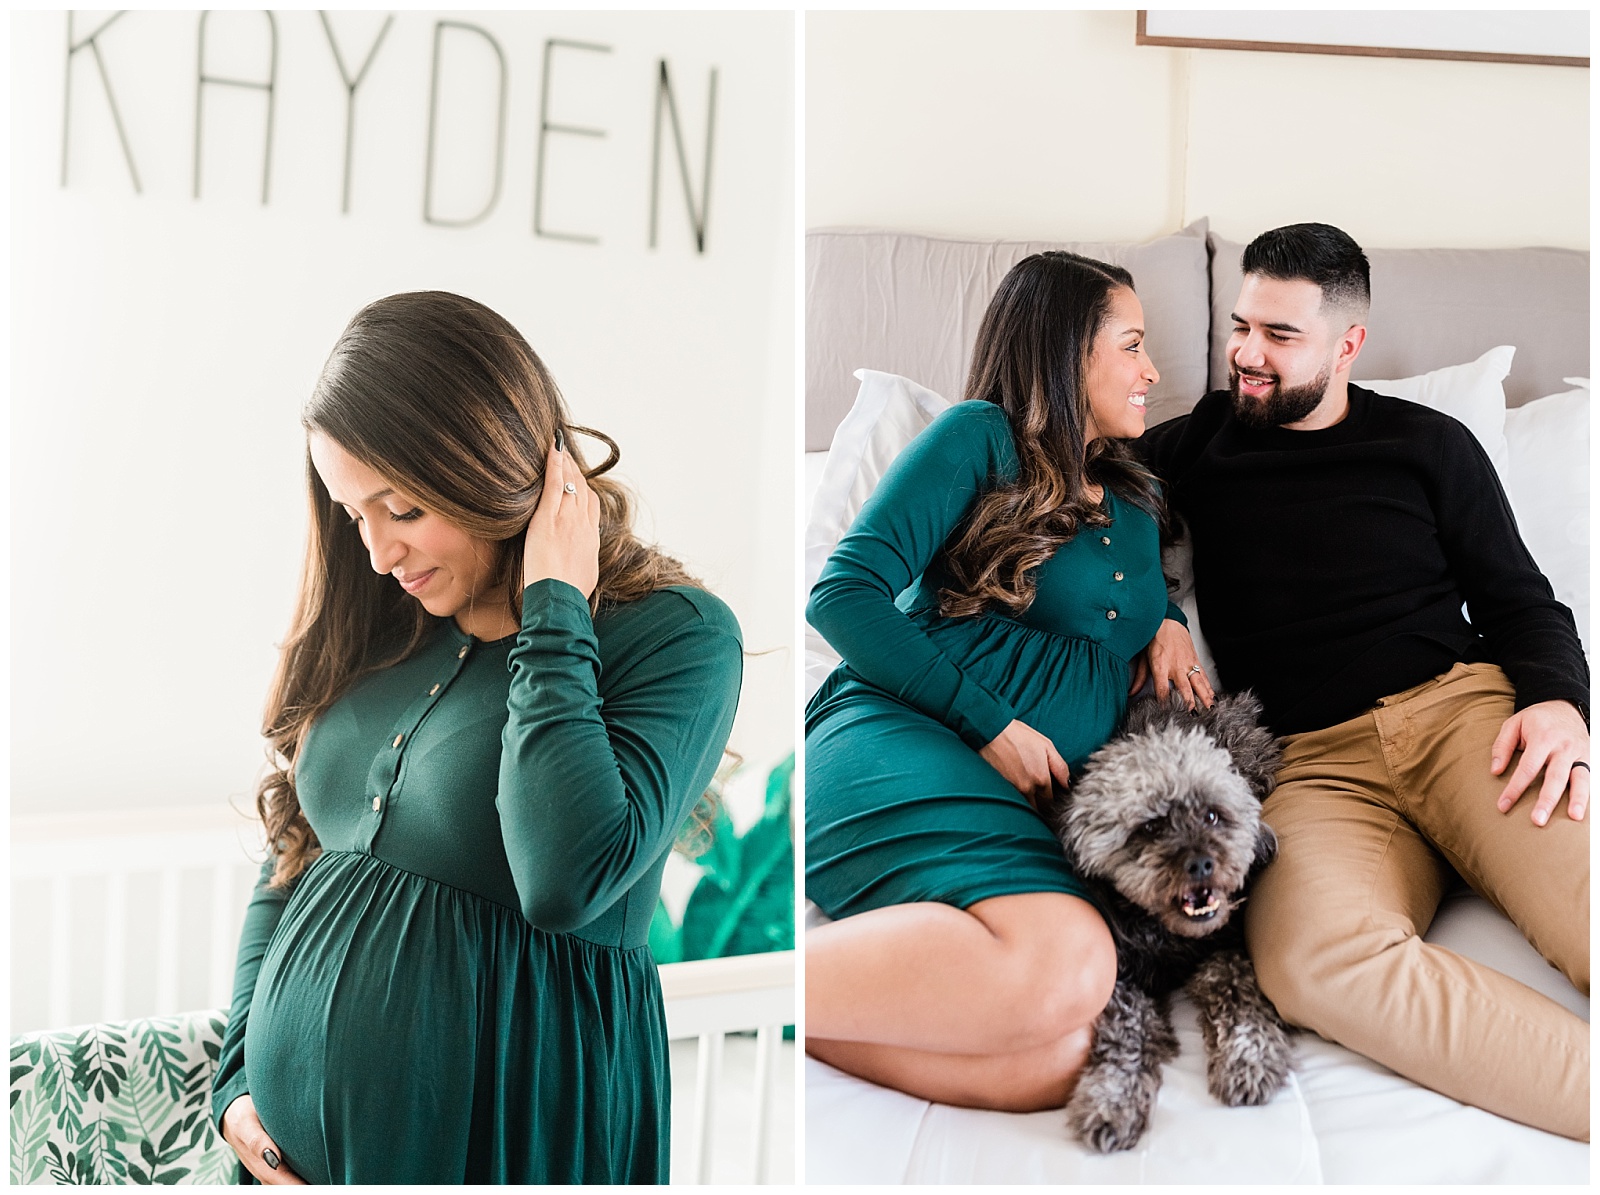 In Home Maternity Session, Nursery, Baby, New Parents, Maternity Shoot, Pregnant, Pregnancy Photos, New Jersey, Photographer, Baby Boy, Jungle Nursery, Photo, Dog, Bedroom